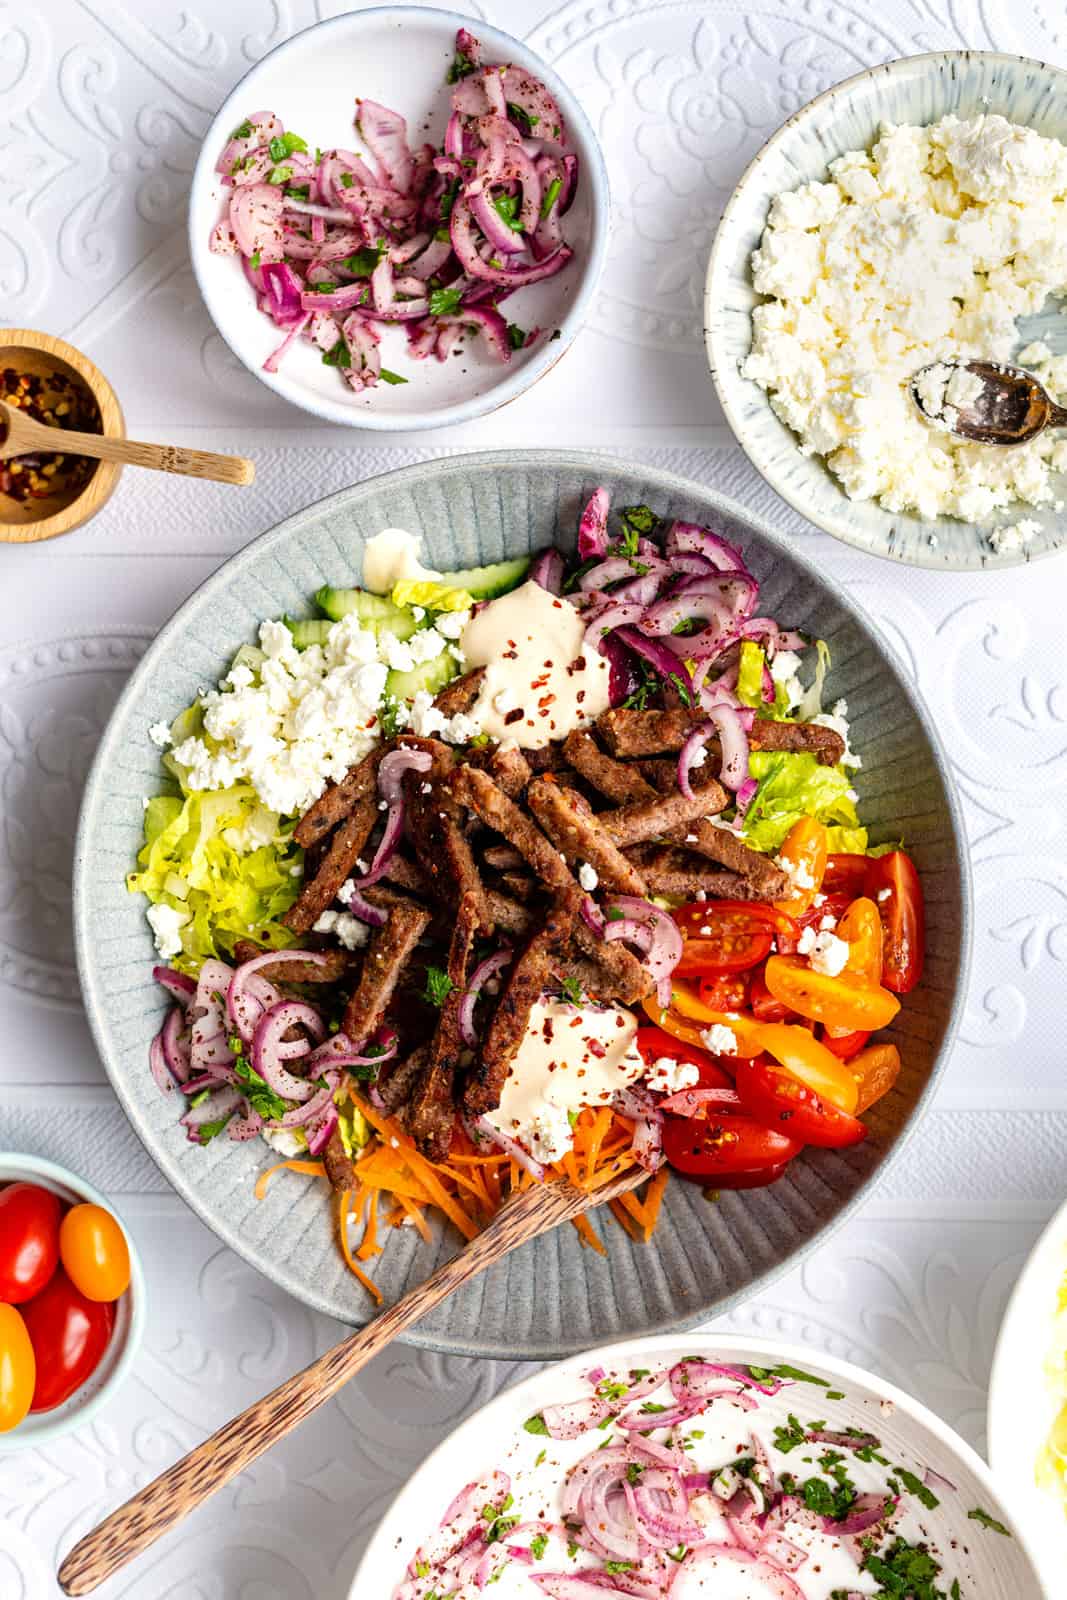 Homemade lamb doner meat cut into strips and served in a bowl with salad, sauce and feta cheese